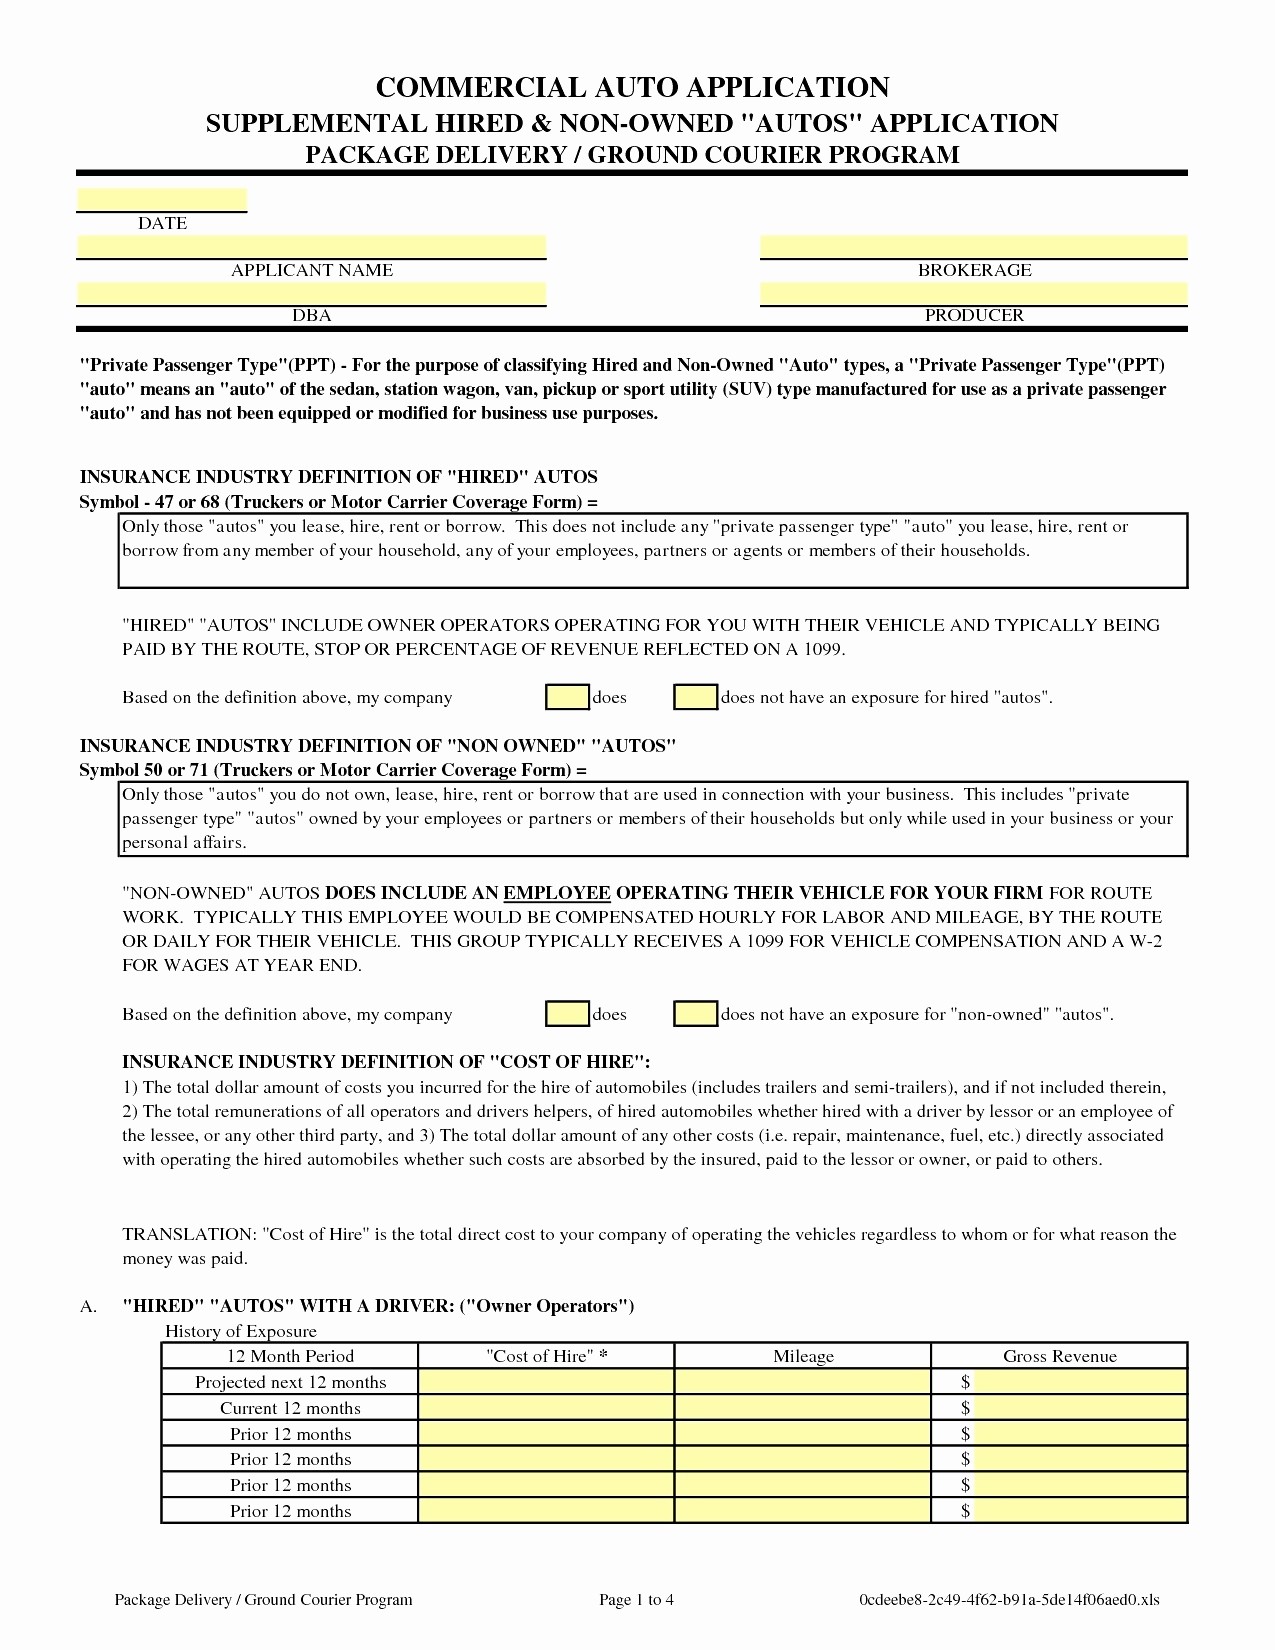 Declarations Page Homeowners Insurance Luxury Document Declaration Sample